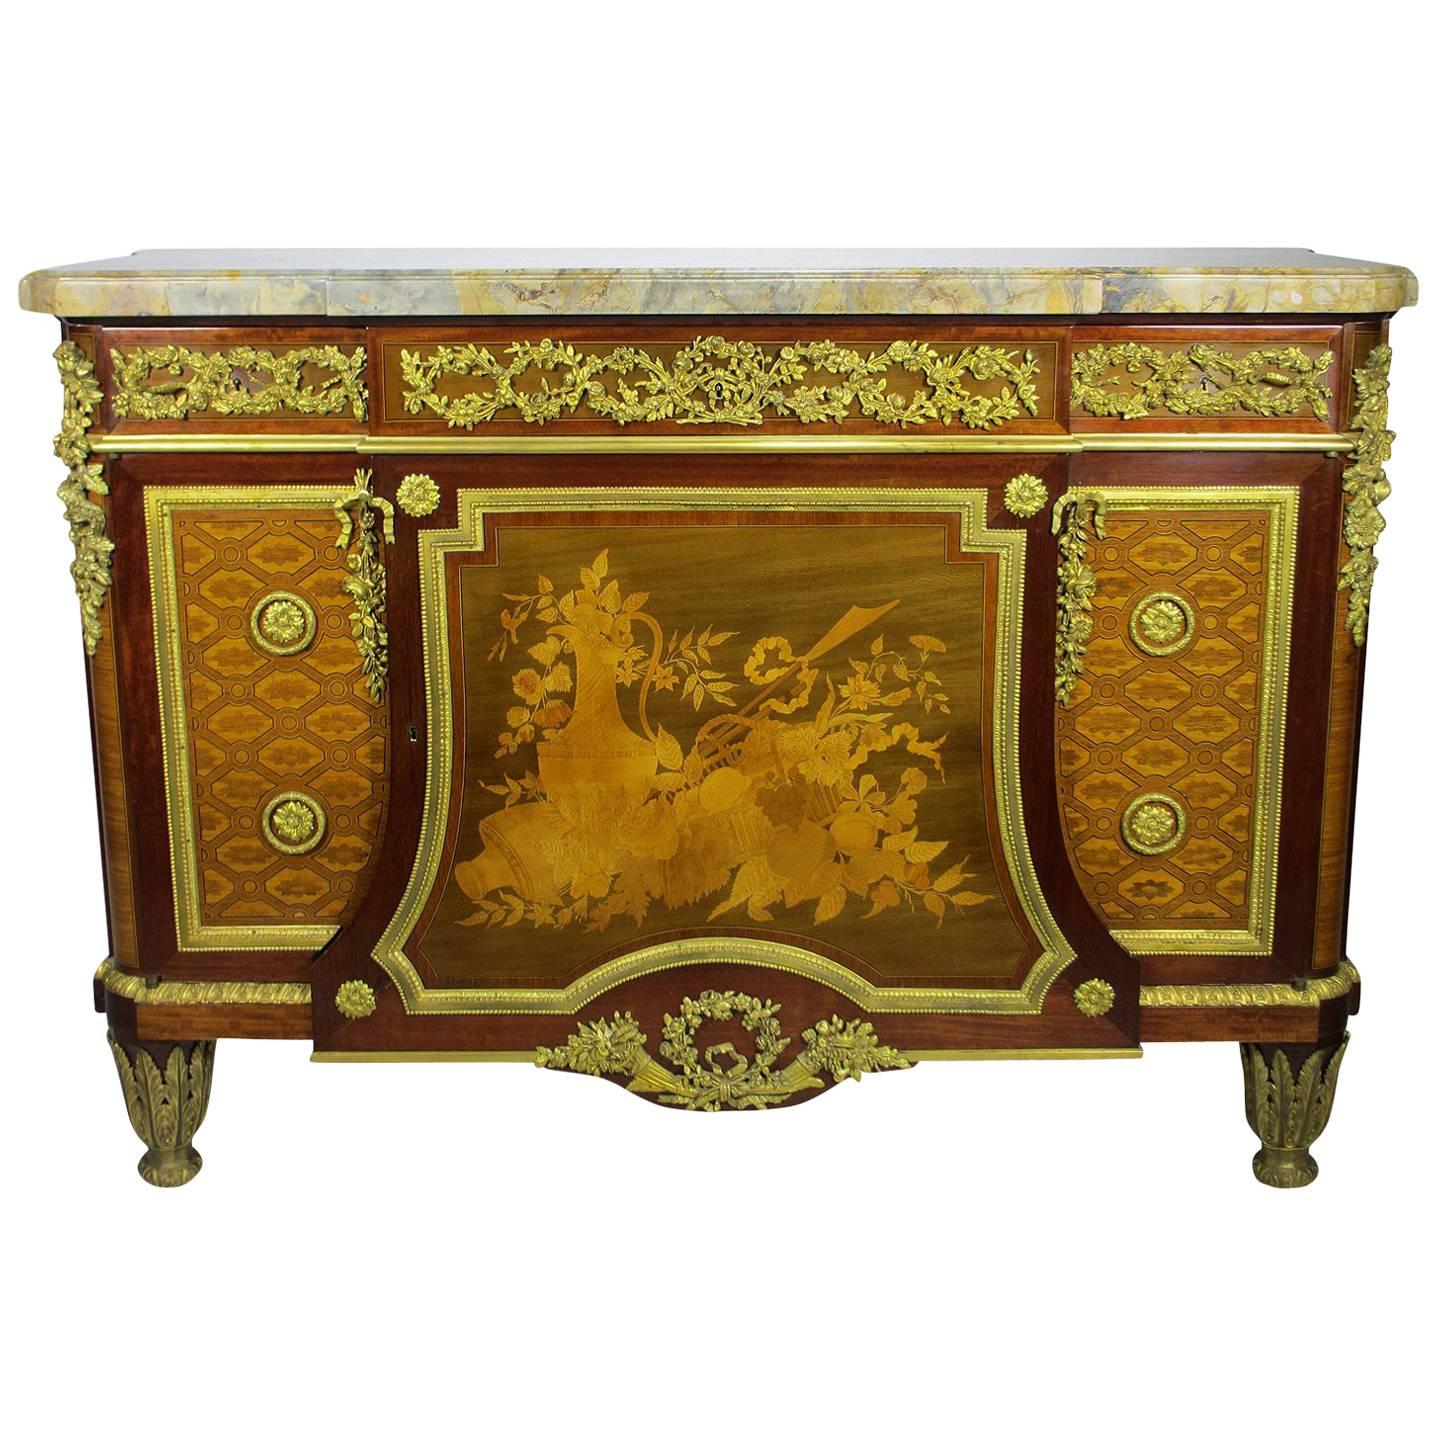 Fine French 19th Century Louis XVI Style Gilt-Bronze Mounted Marquetry Commode